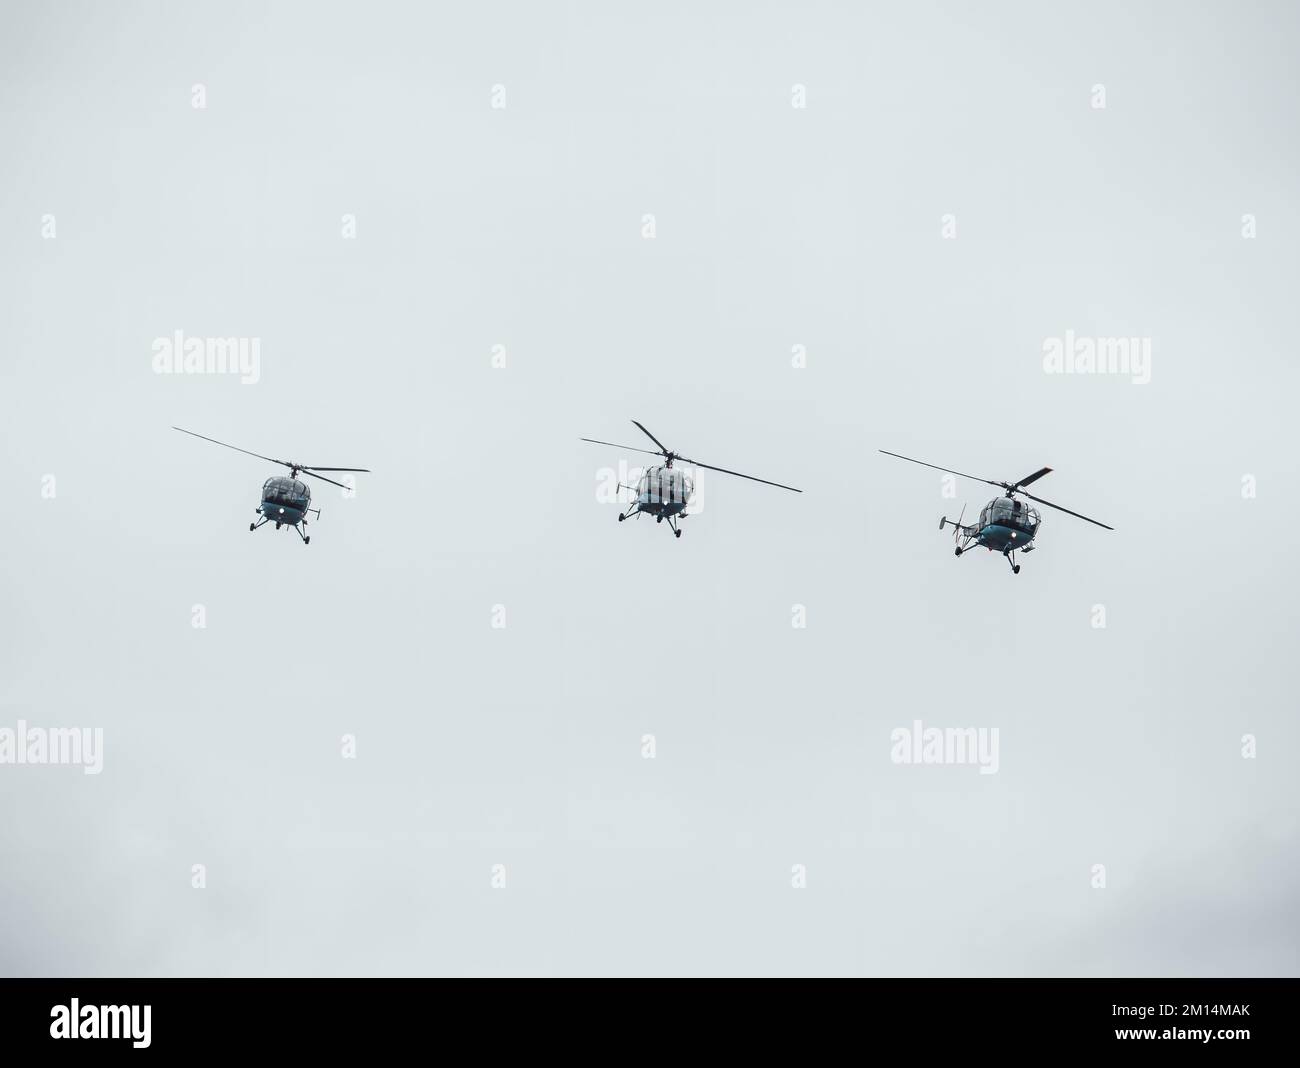 Three helicopters flying against a cloudy sky. Airshow demonstration. Stock Photo